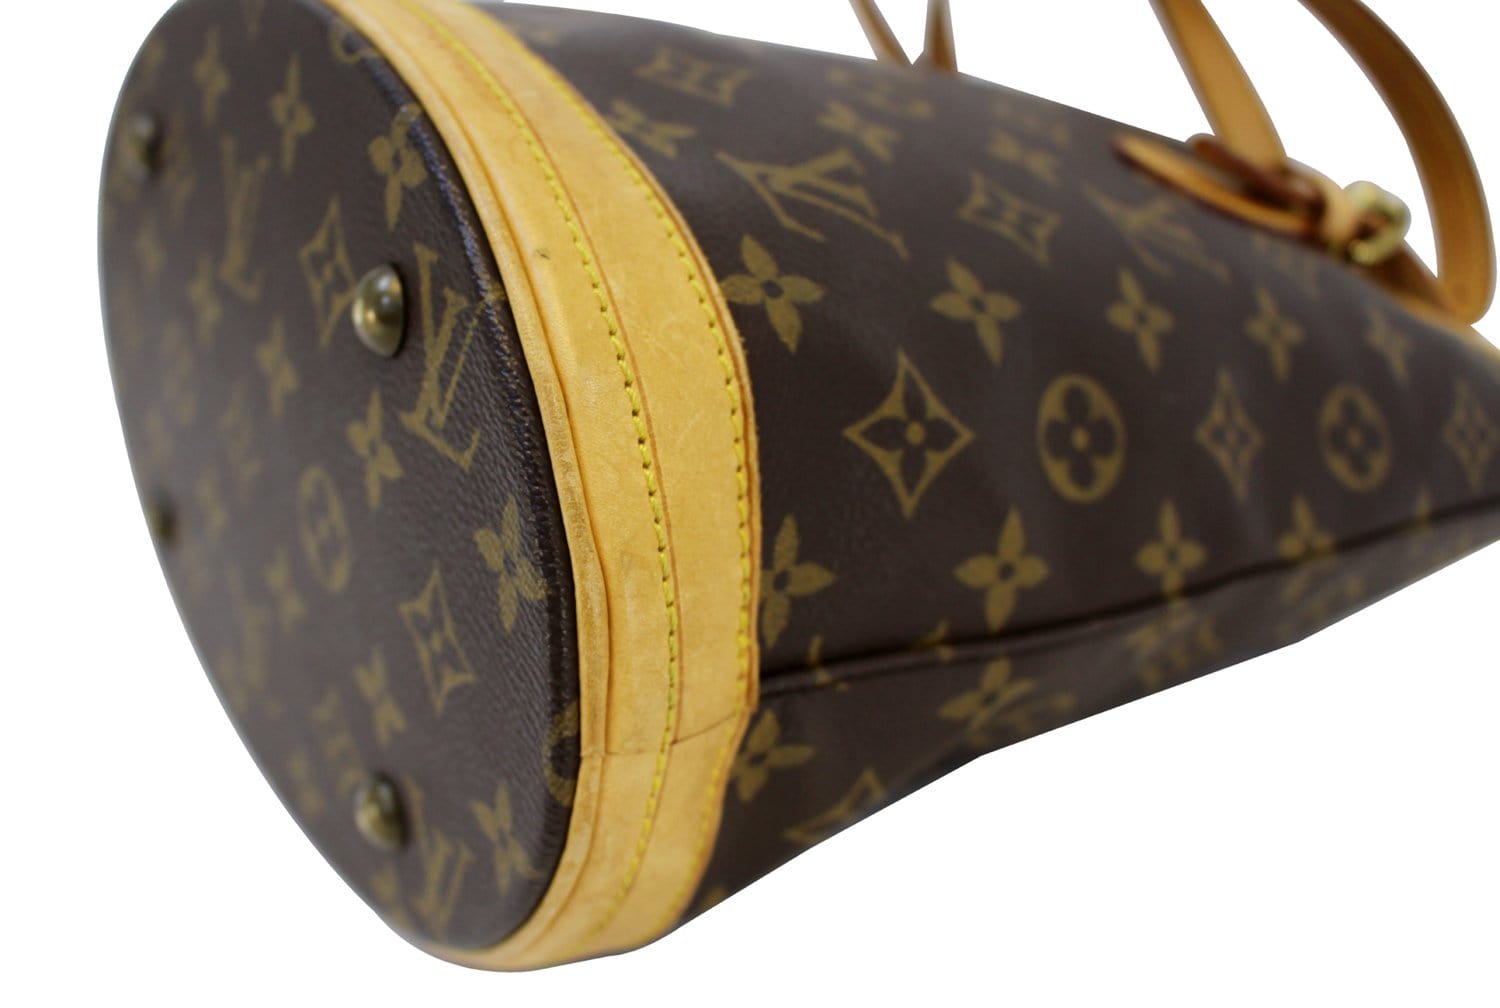 LOUIS VUITTON ルイヴィトン バケットPM M42238の買取実績